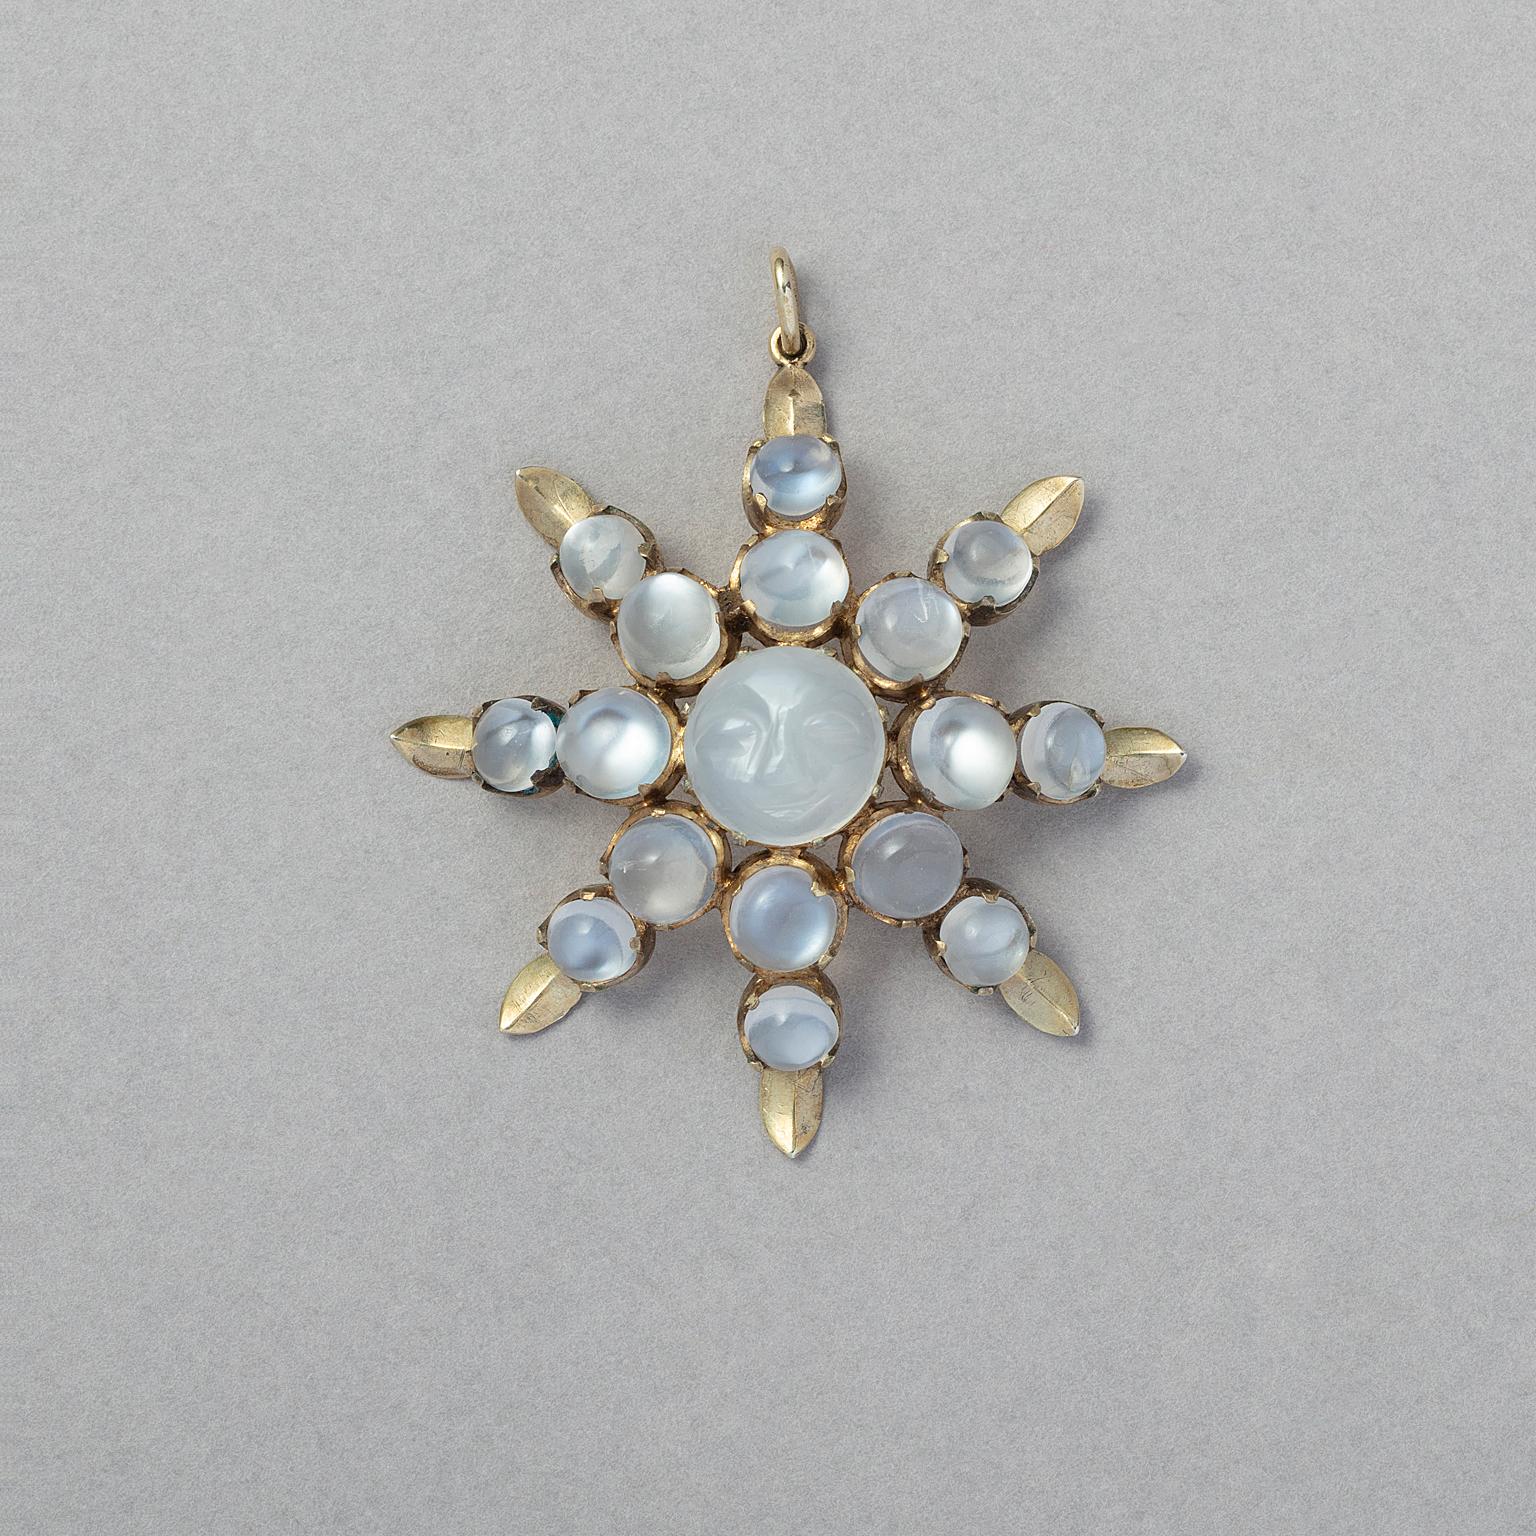 A silver gilt eight-point star pendant, set with two cabochon cut moonstones on each point, descending in size. In the centre a larger round moonstone with a carved smiling face of the 'man in the moon', American, circa 1890.
 
weight: 6.81